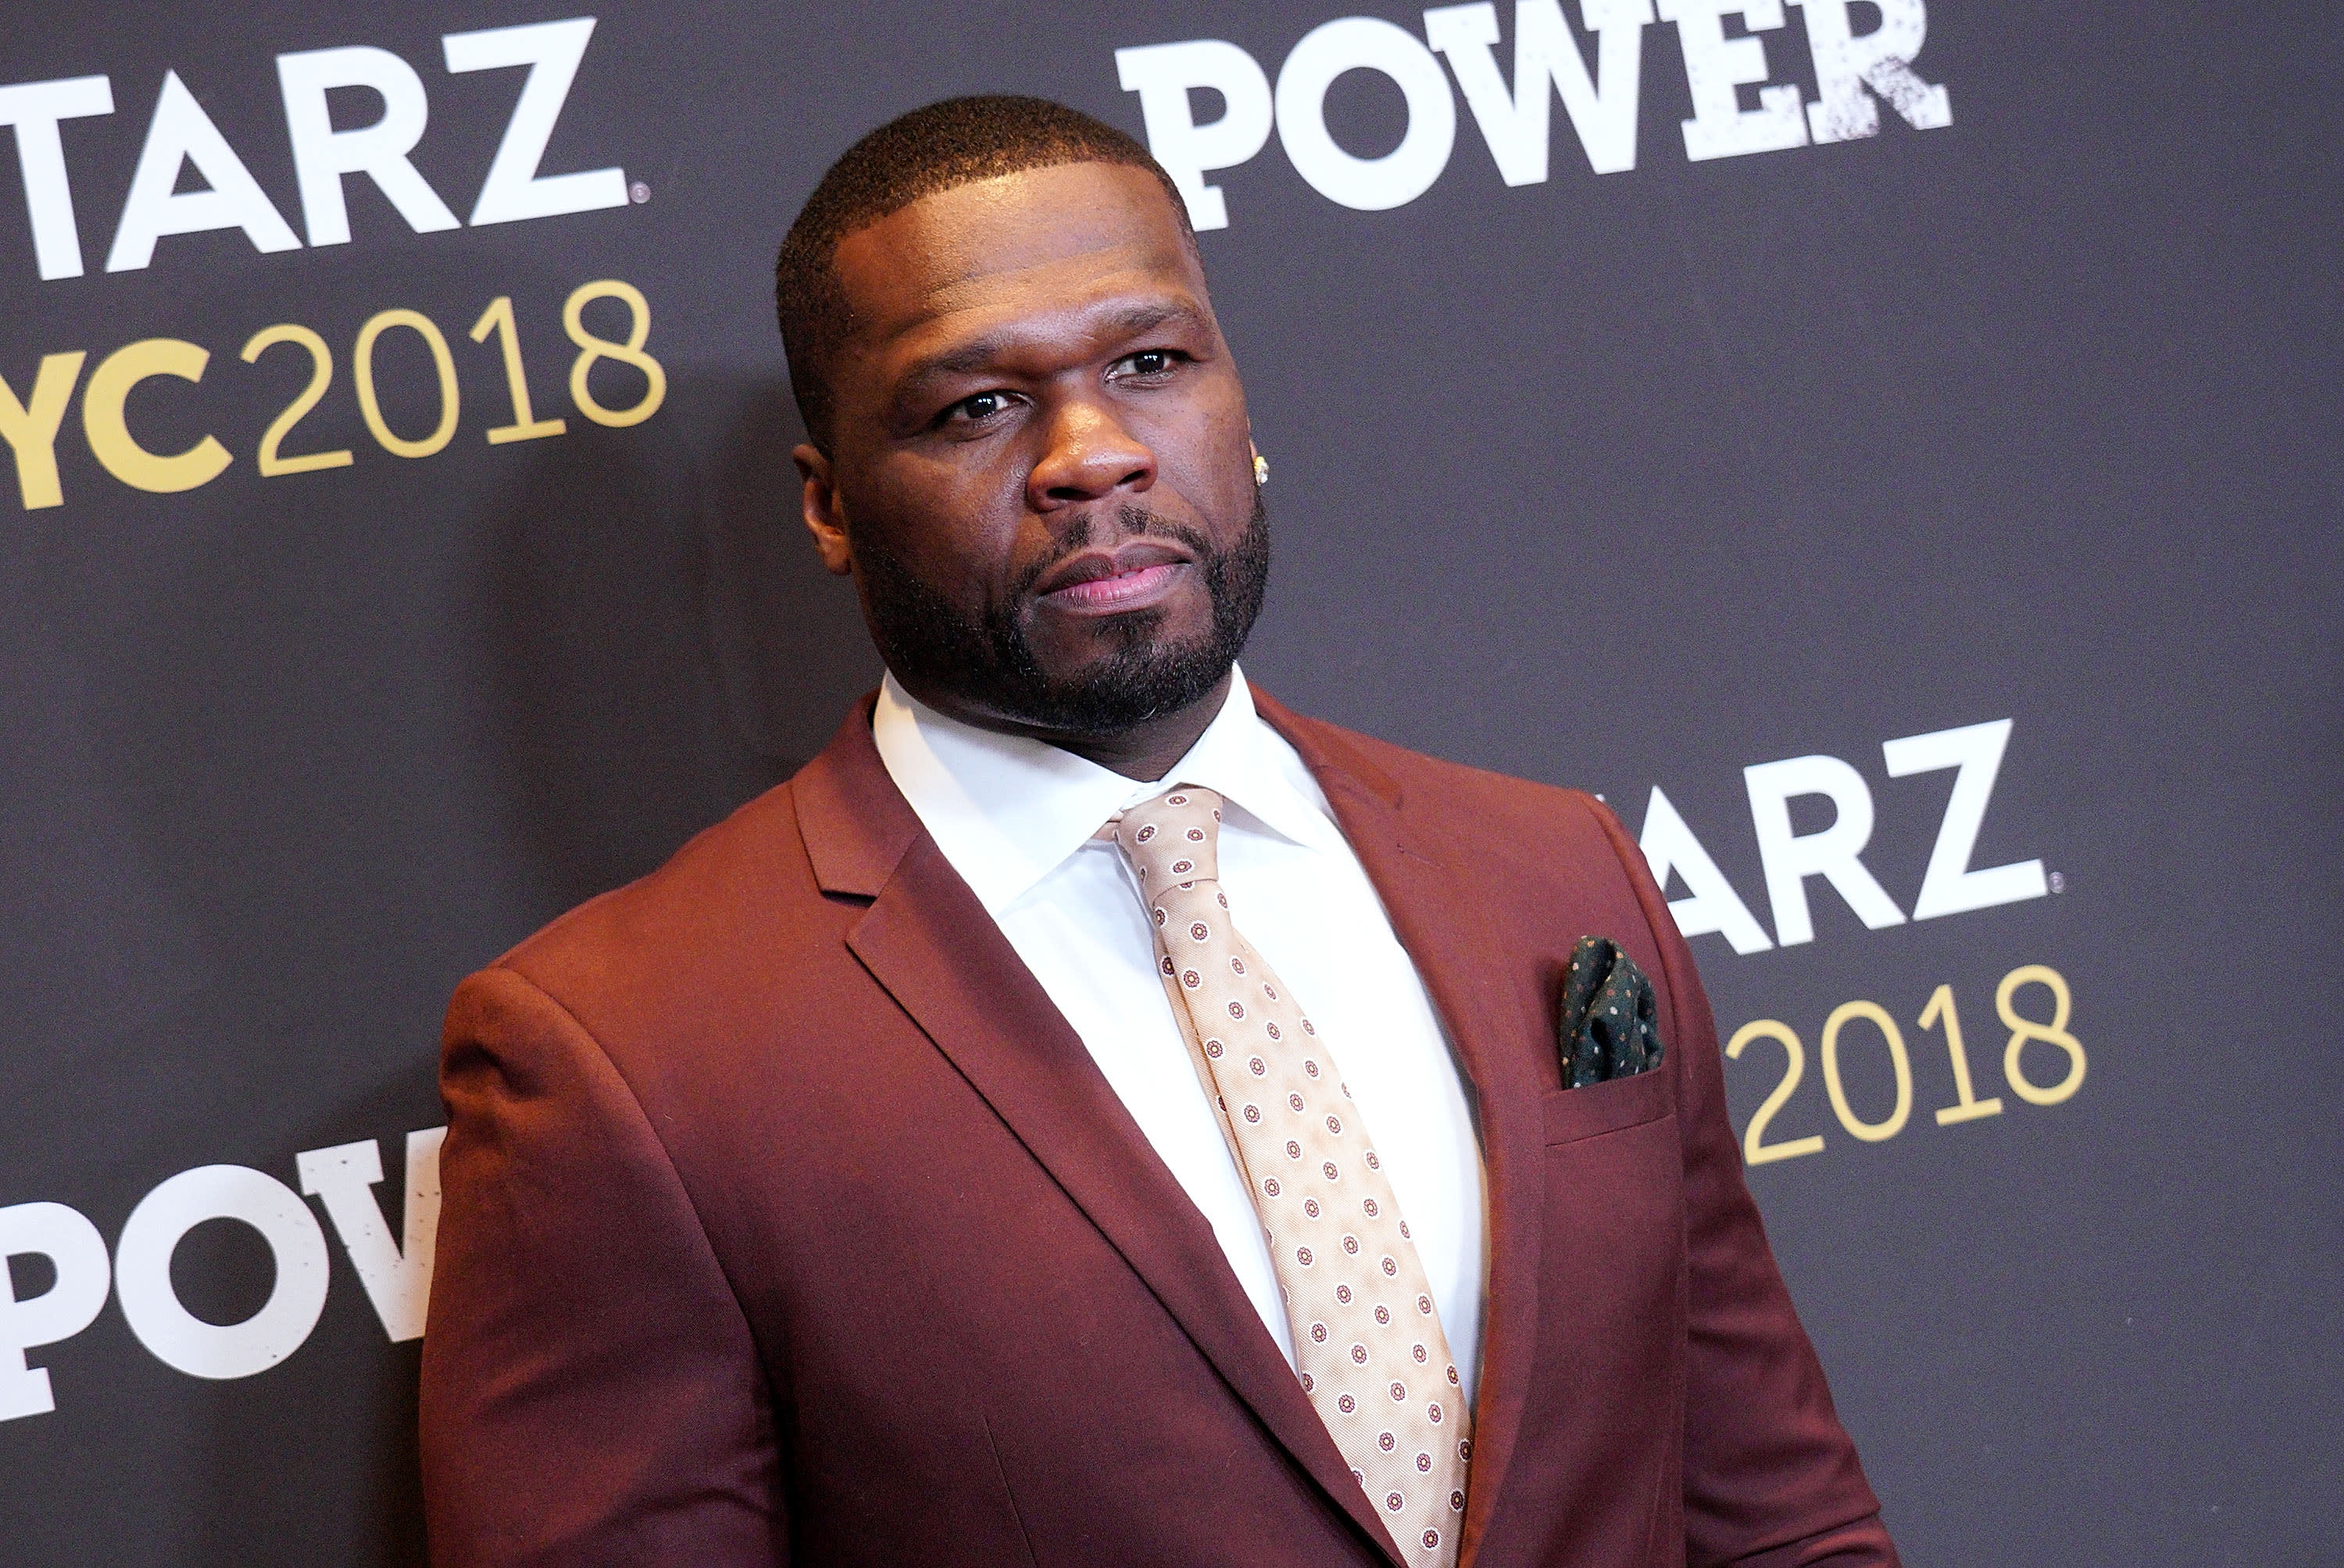 50 Cent used the ‘unwritten laws of power’ to make $10 million for the movie